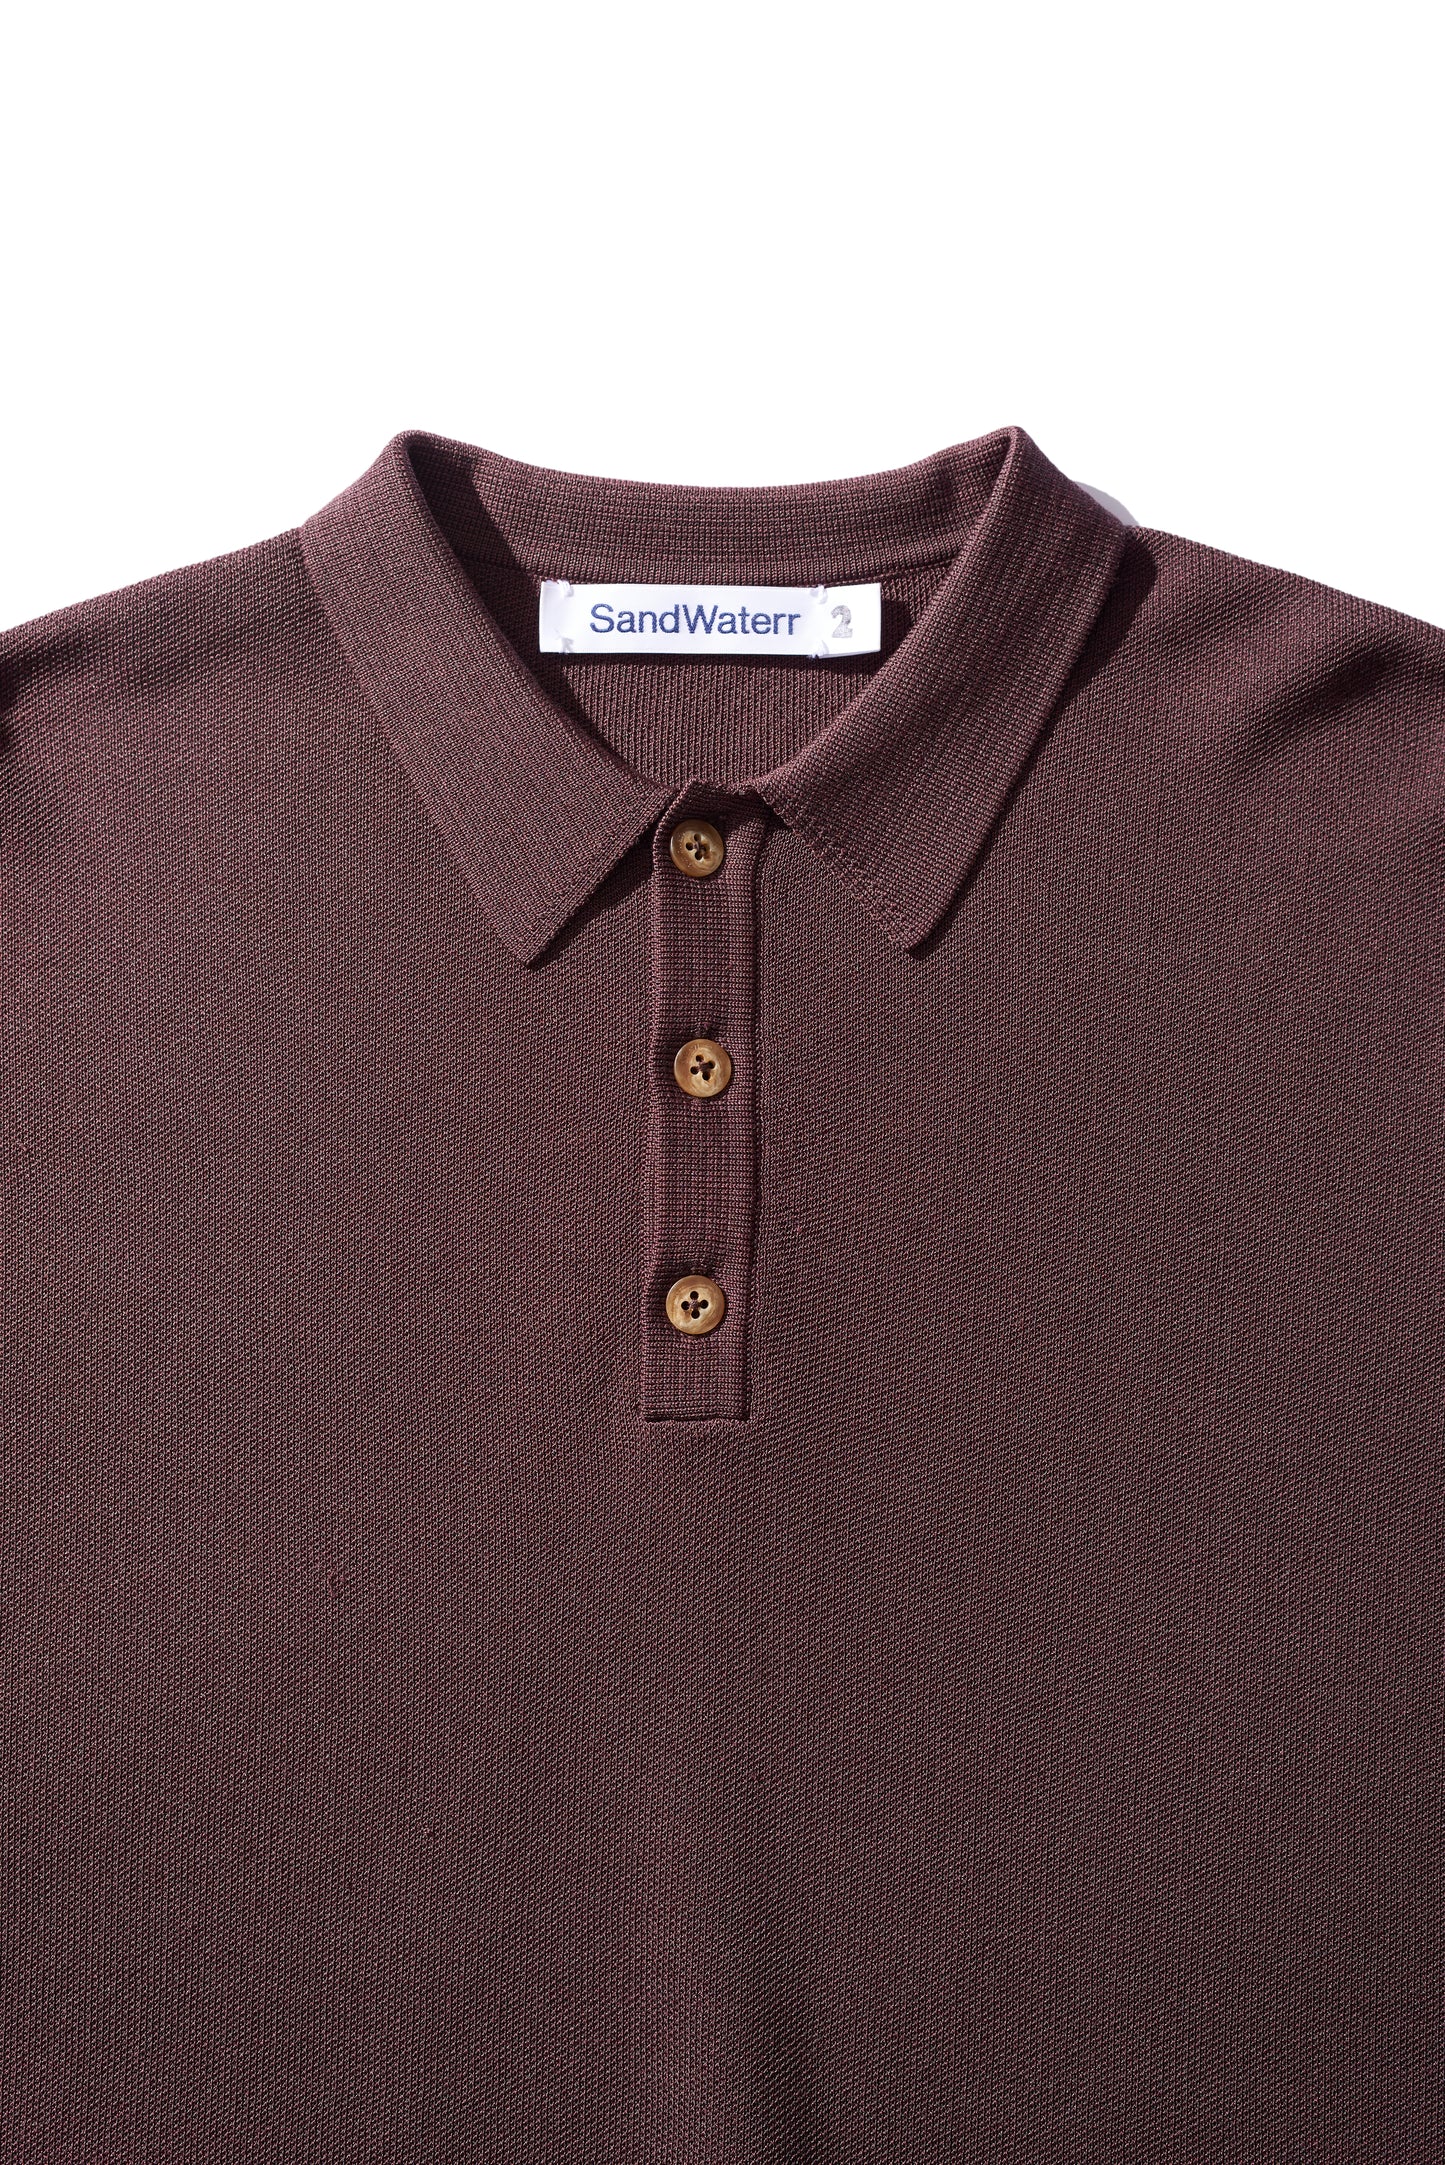 RESEARCHED KNIT POLO SS / SYNTHETIC FIBERS YARN